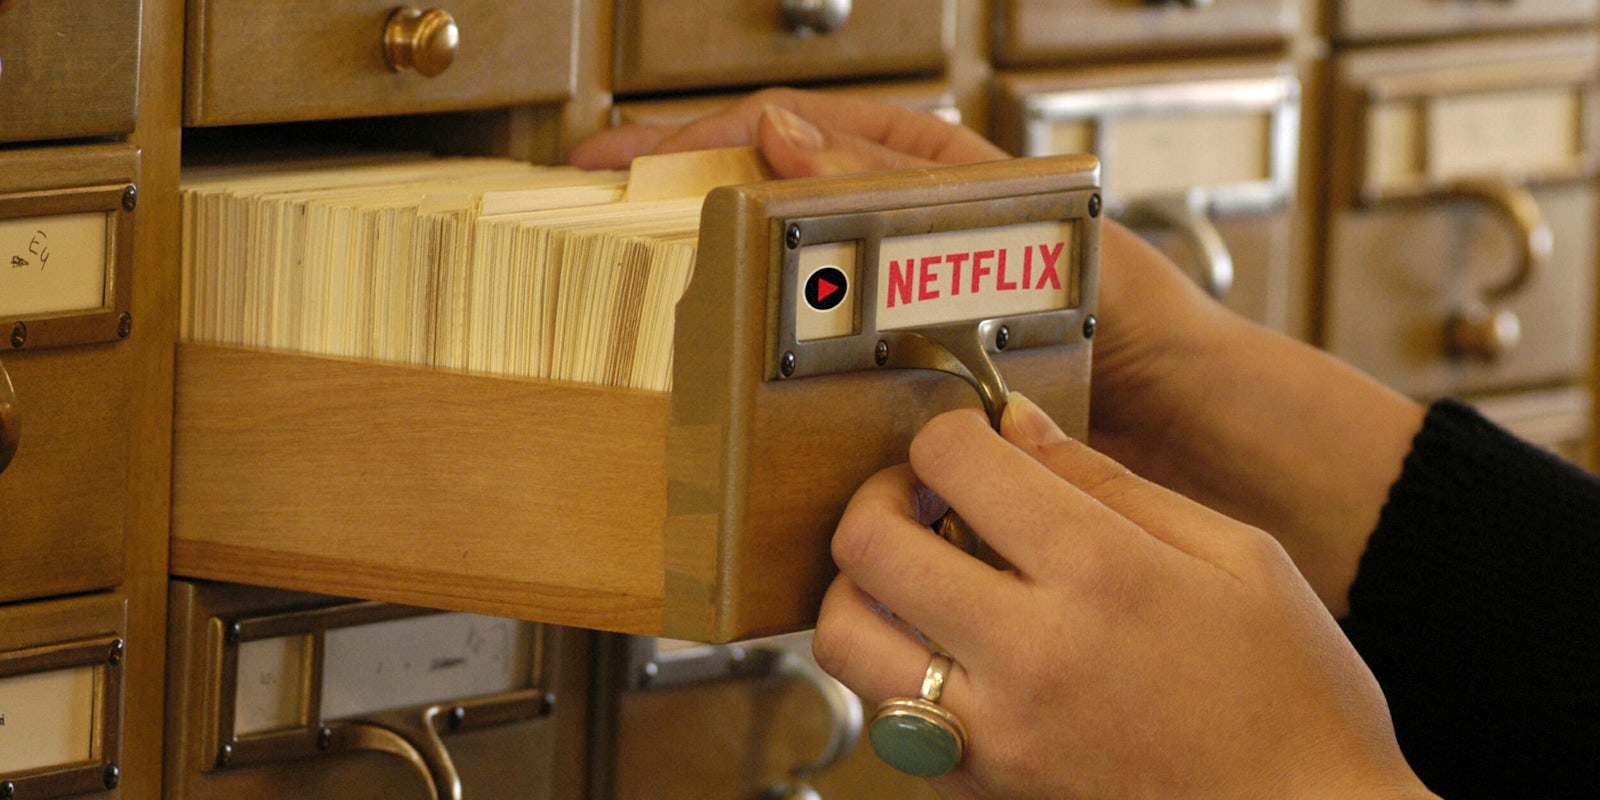 Woman opening card catalog with Netflix logo on the front